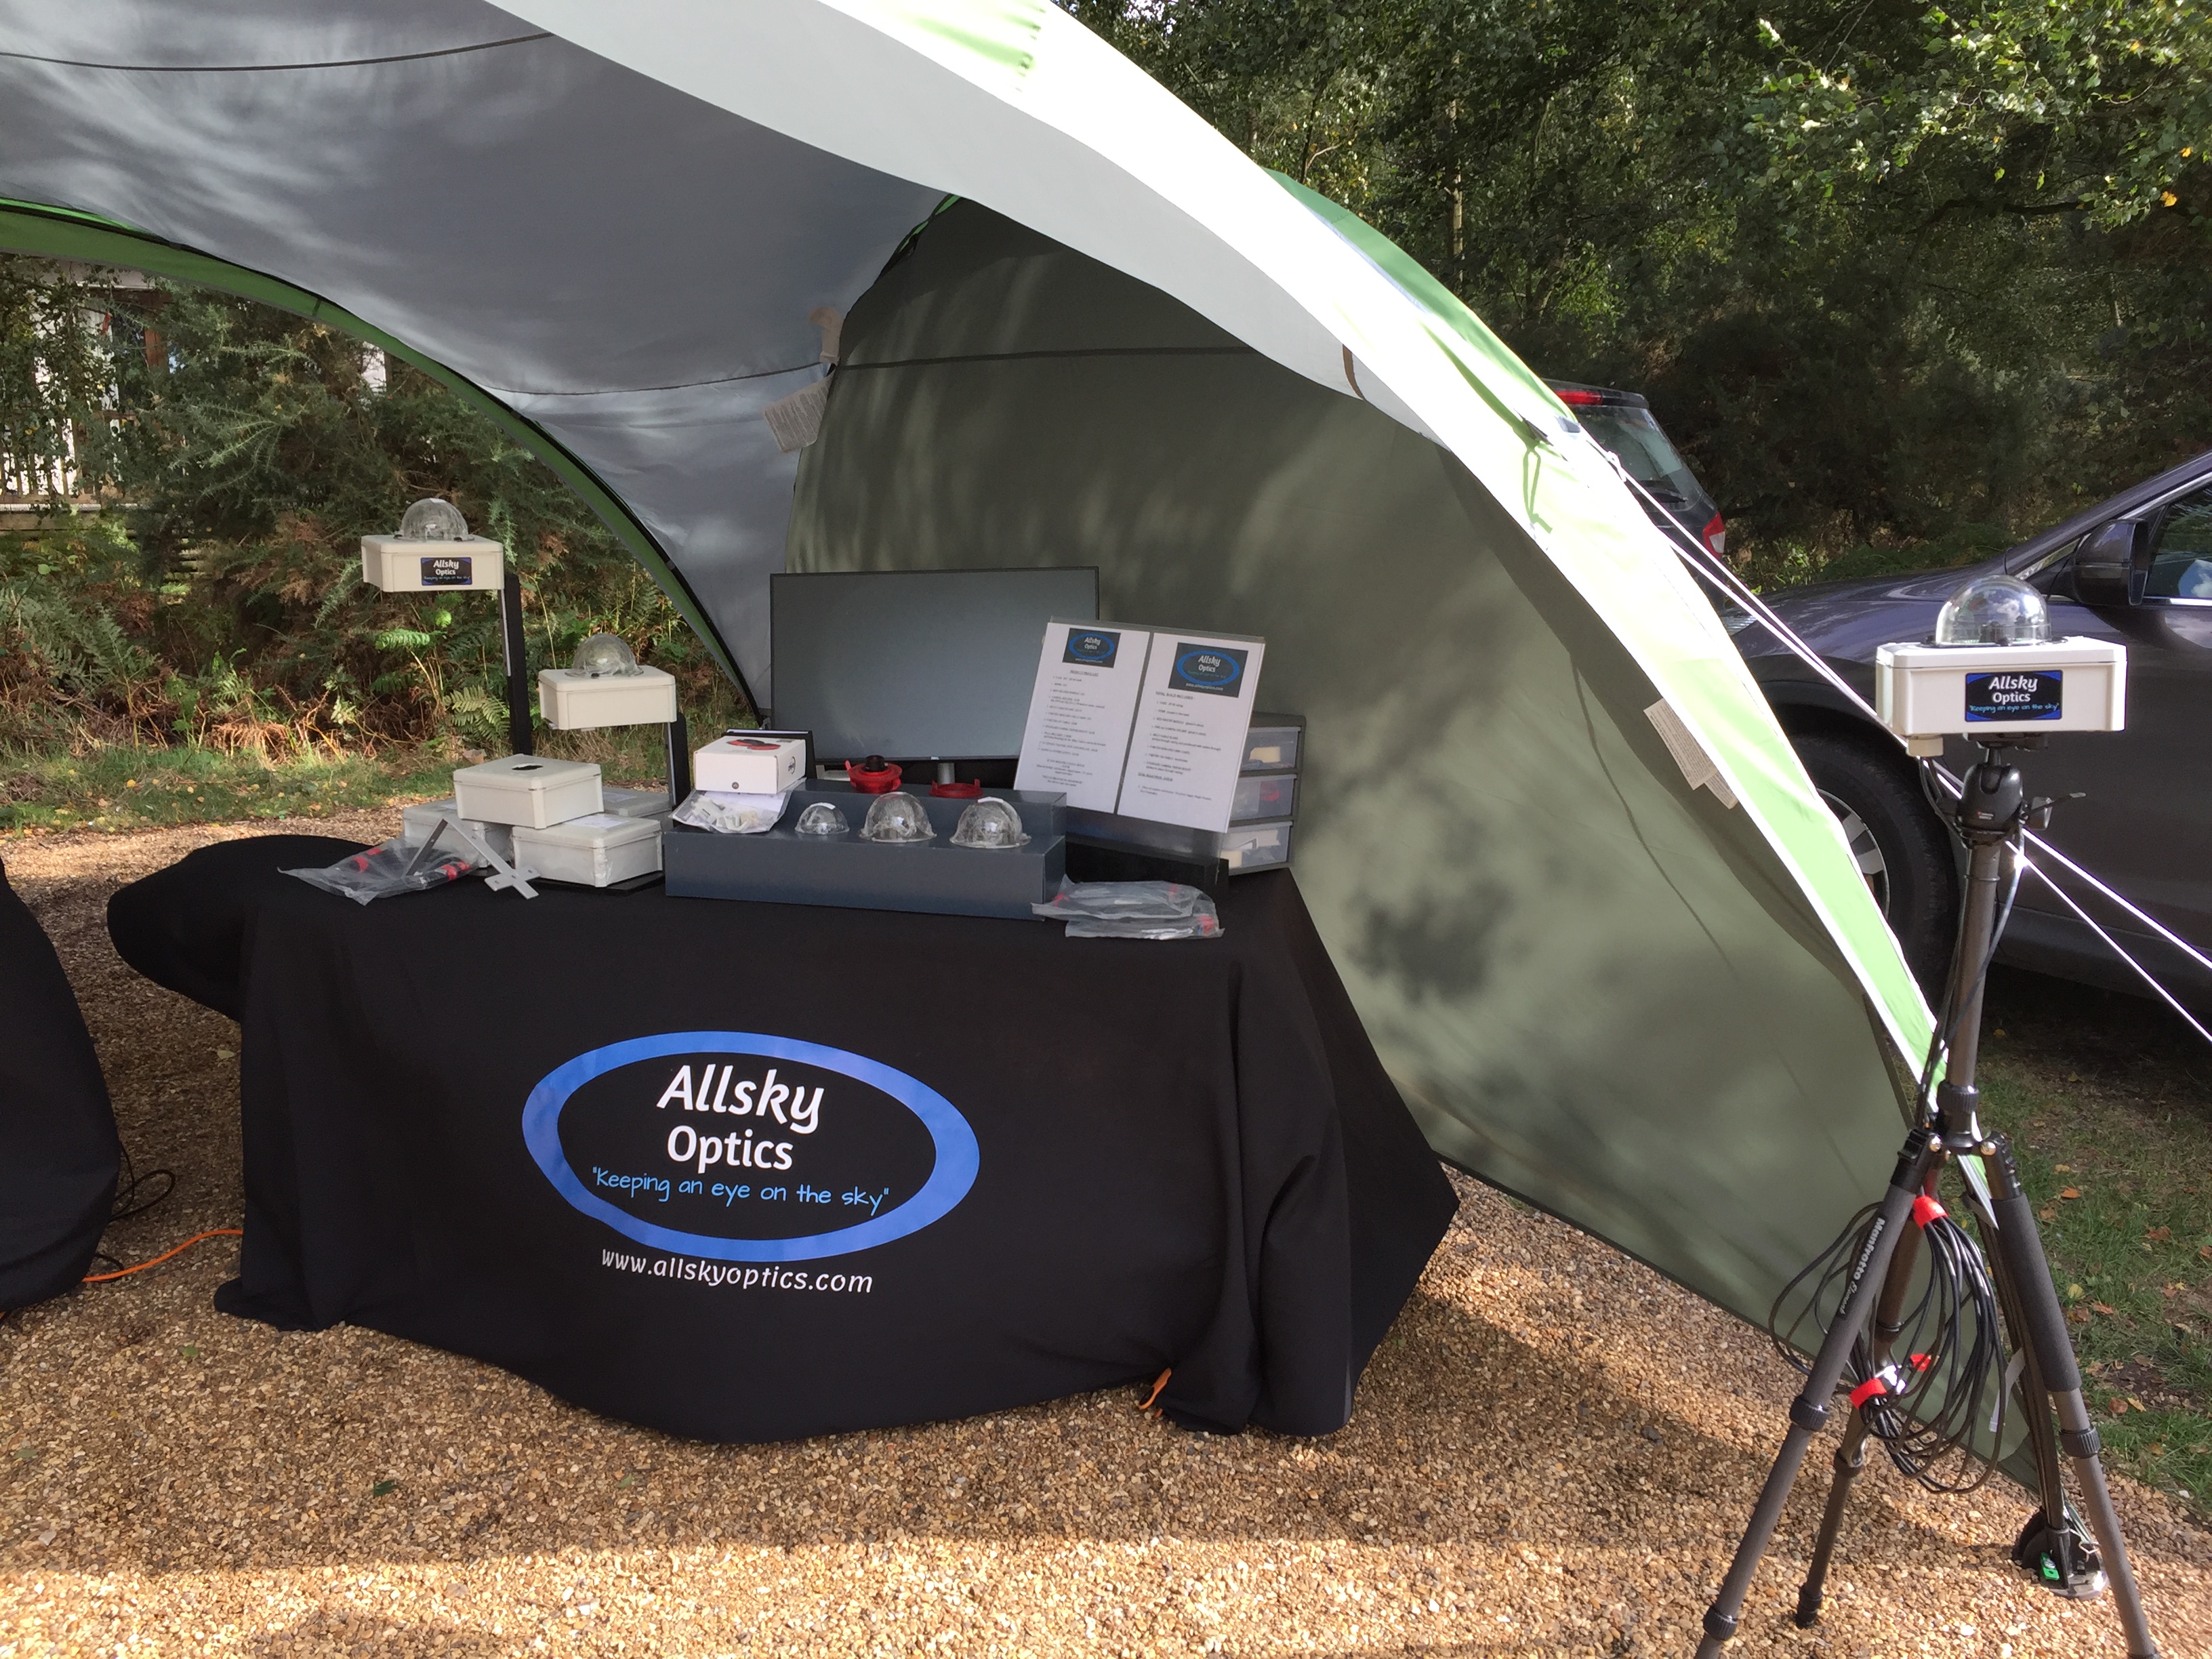 Launching Allsky Optics at kelling Heath, a do or die moment! 31/09/19.